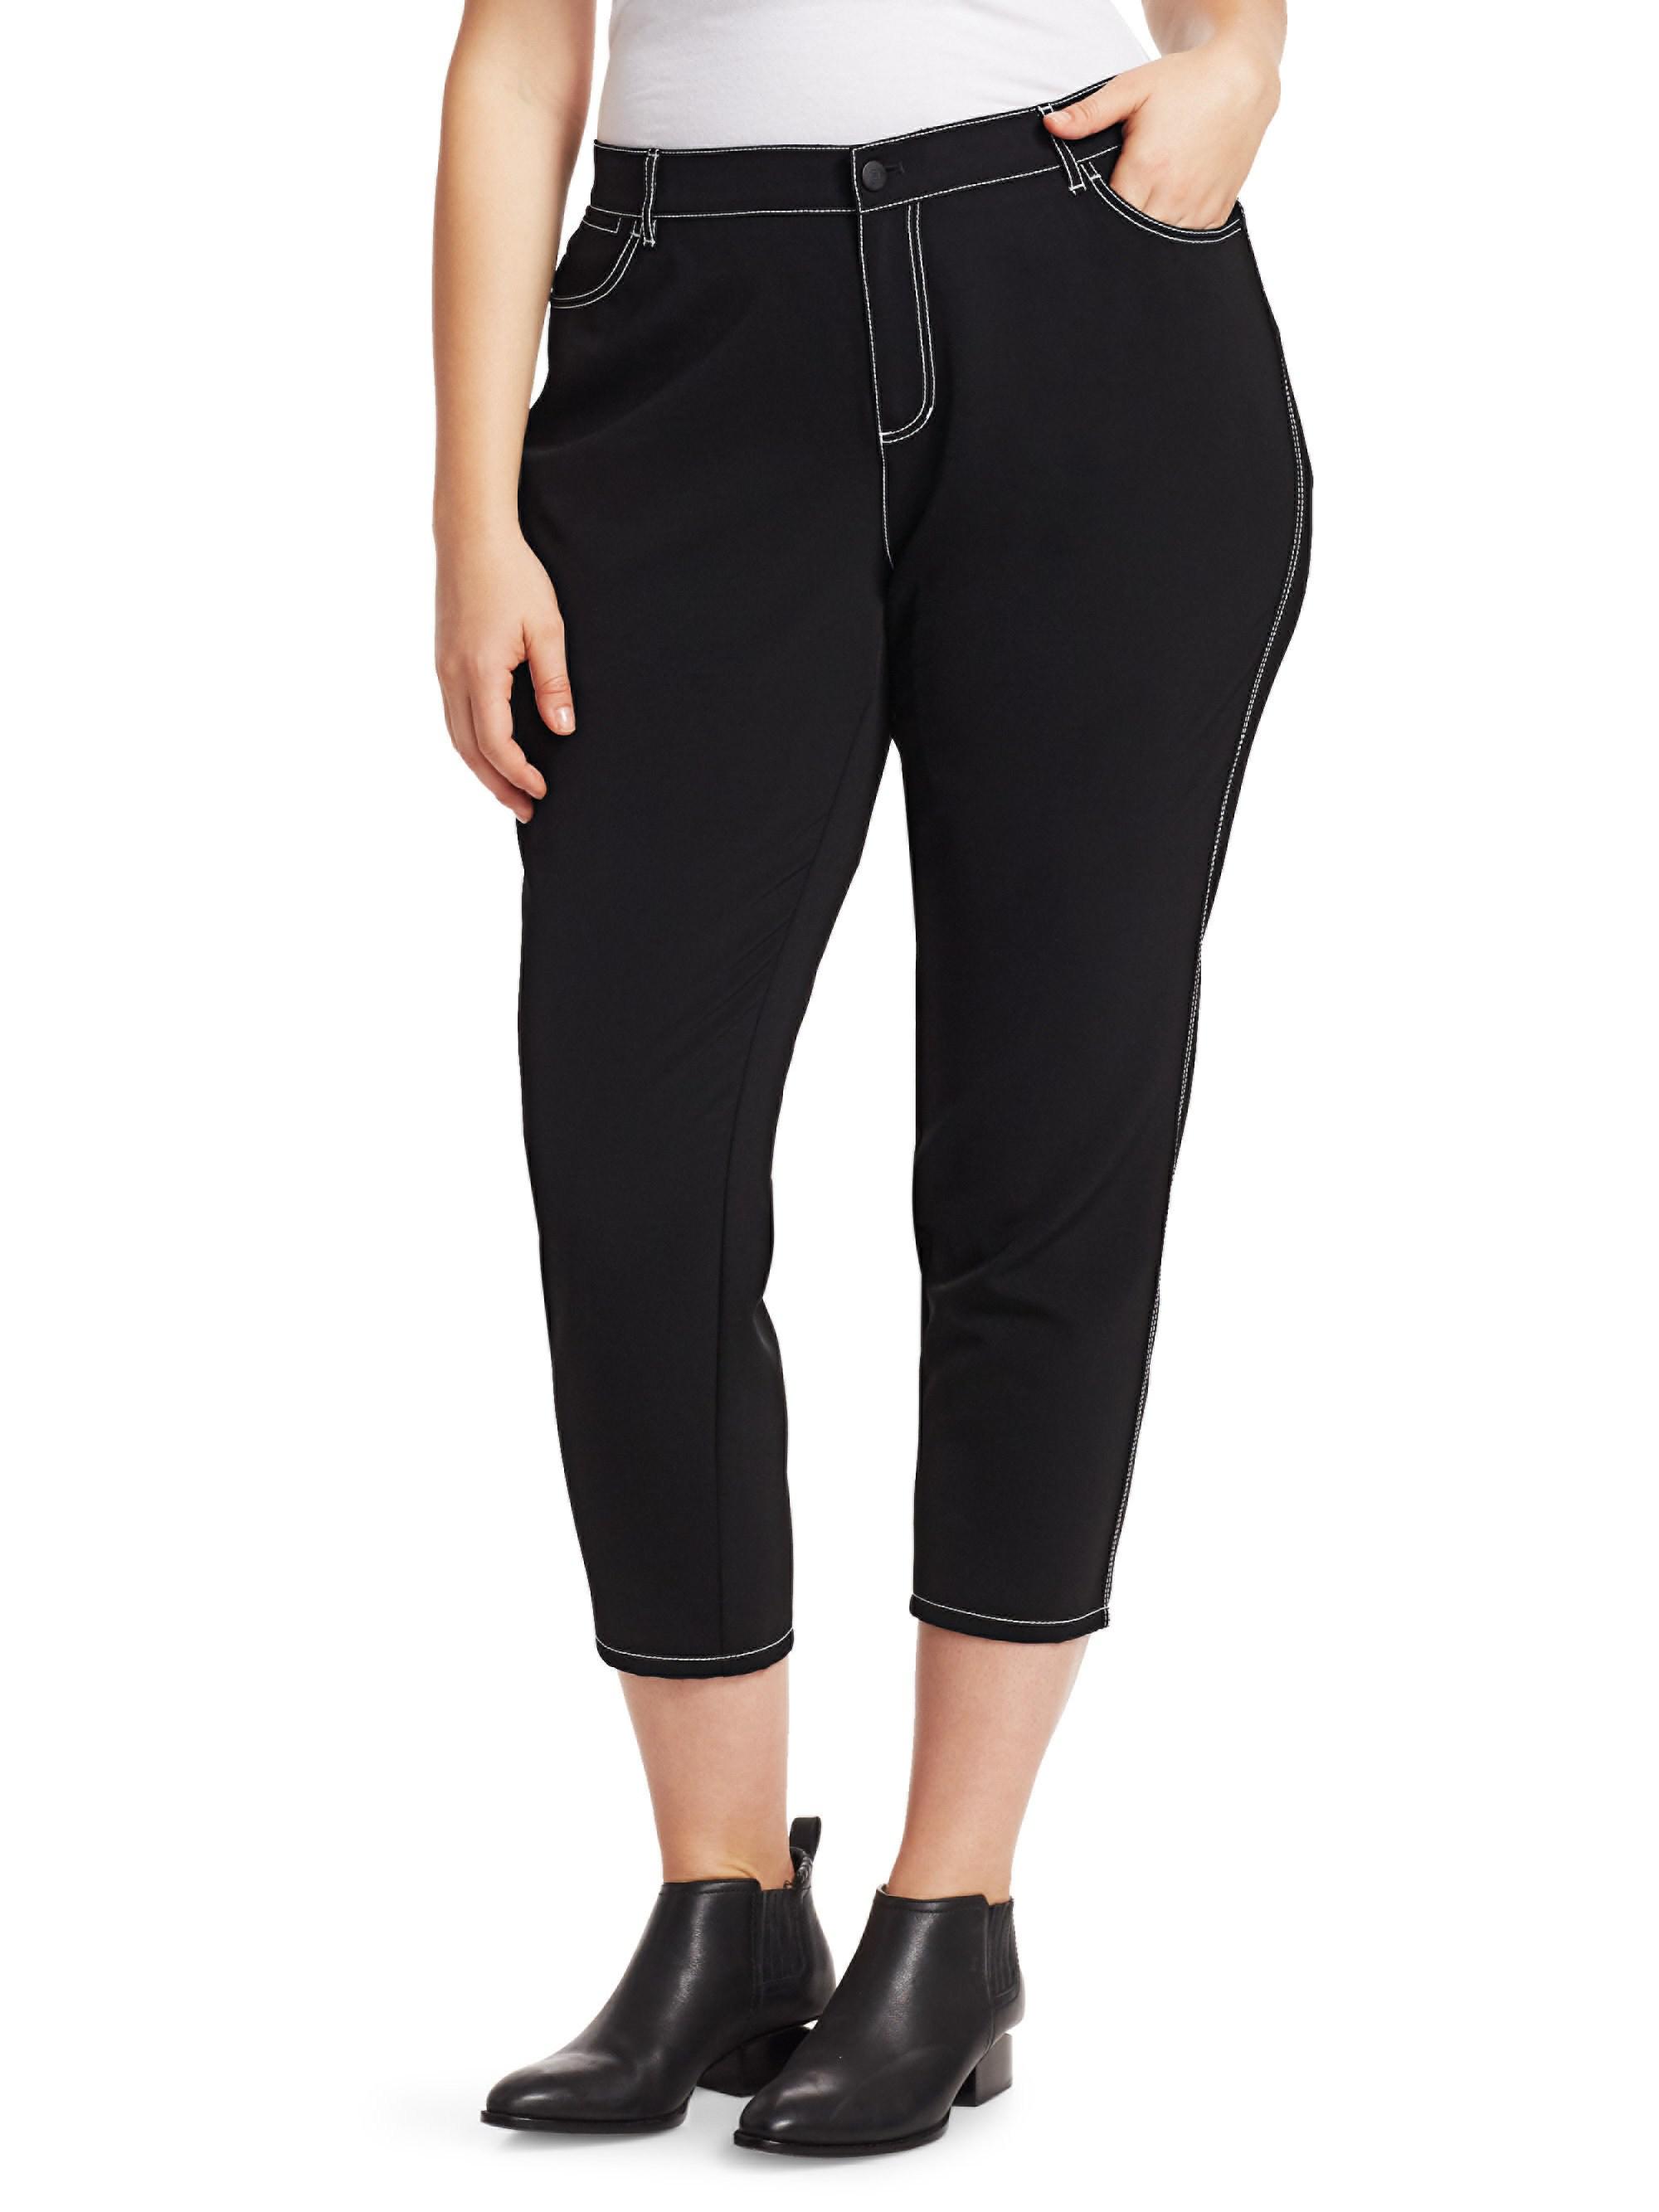 Lyst - Lafayette 148 New York Mercer Contrast Stitch Cropped Pants in Black